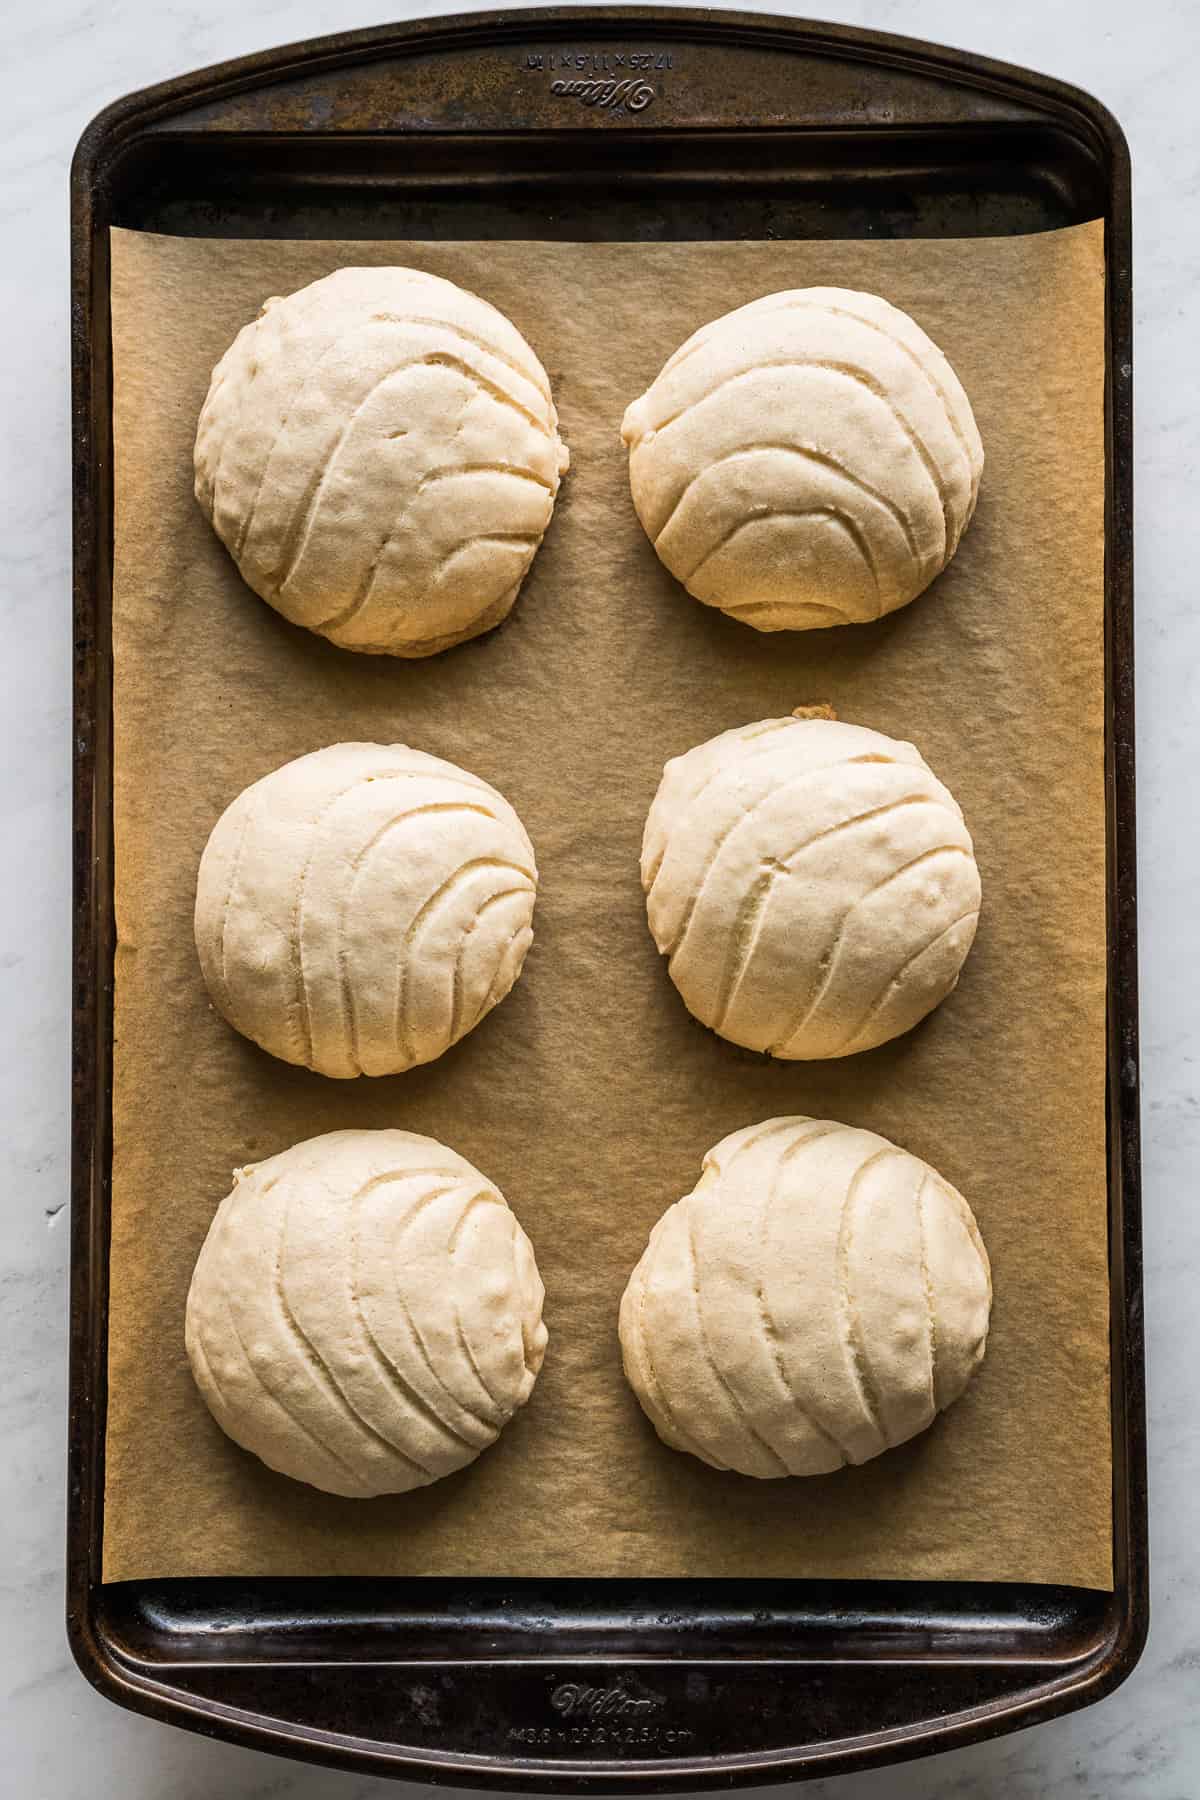 Baked maple conchas on baking sheet lined with parchment paper.